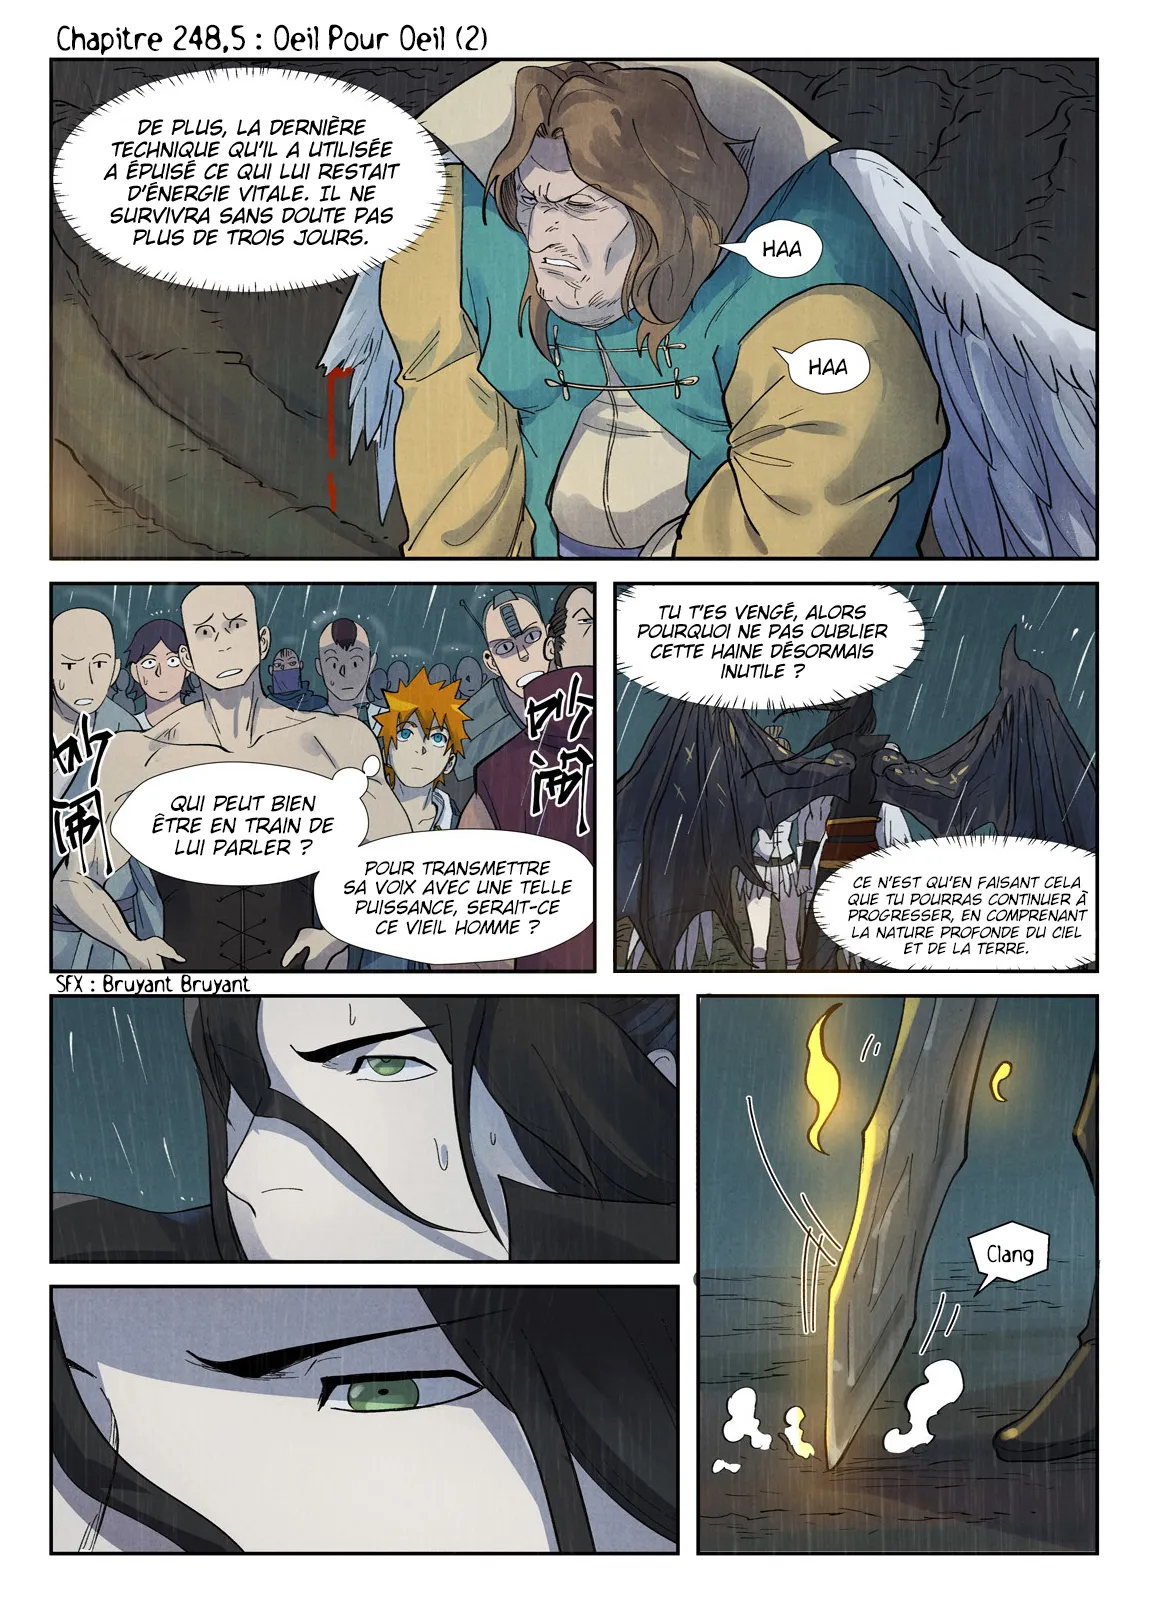 Tales Of Demons And Gods: Chapter chapitre-248.5 - Page 1